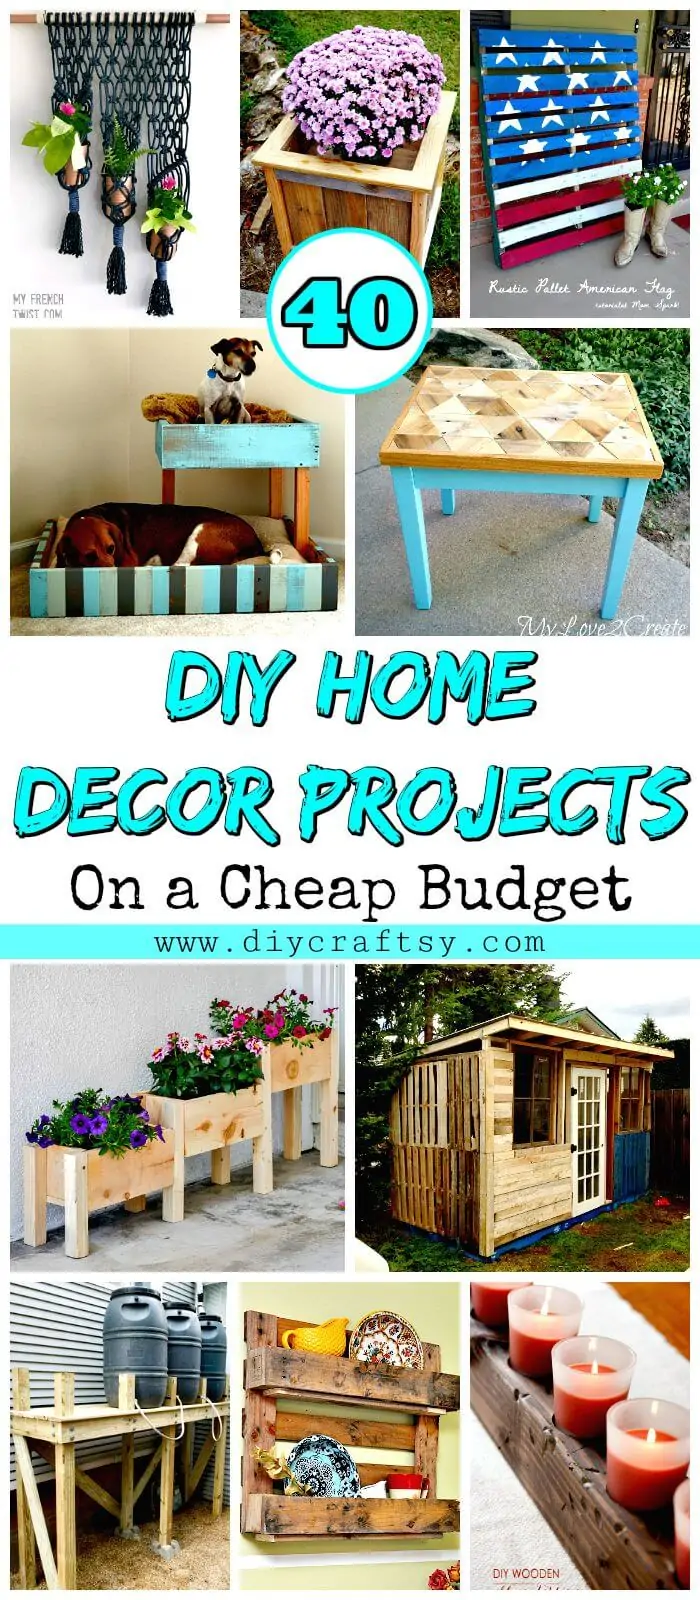 DIY-Home-Decor-Projects-on-a-Cheap-Budget